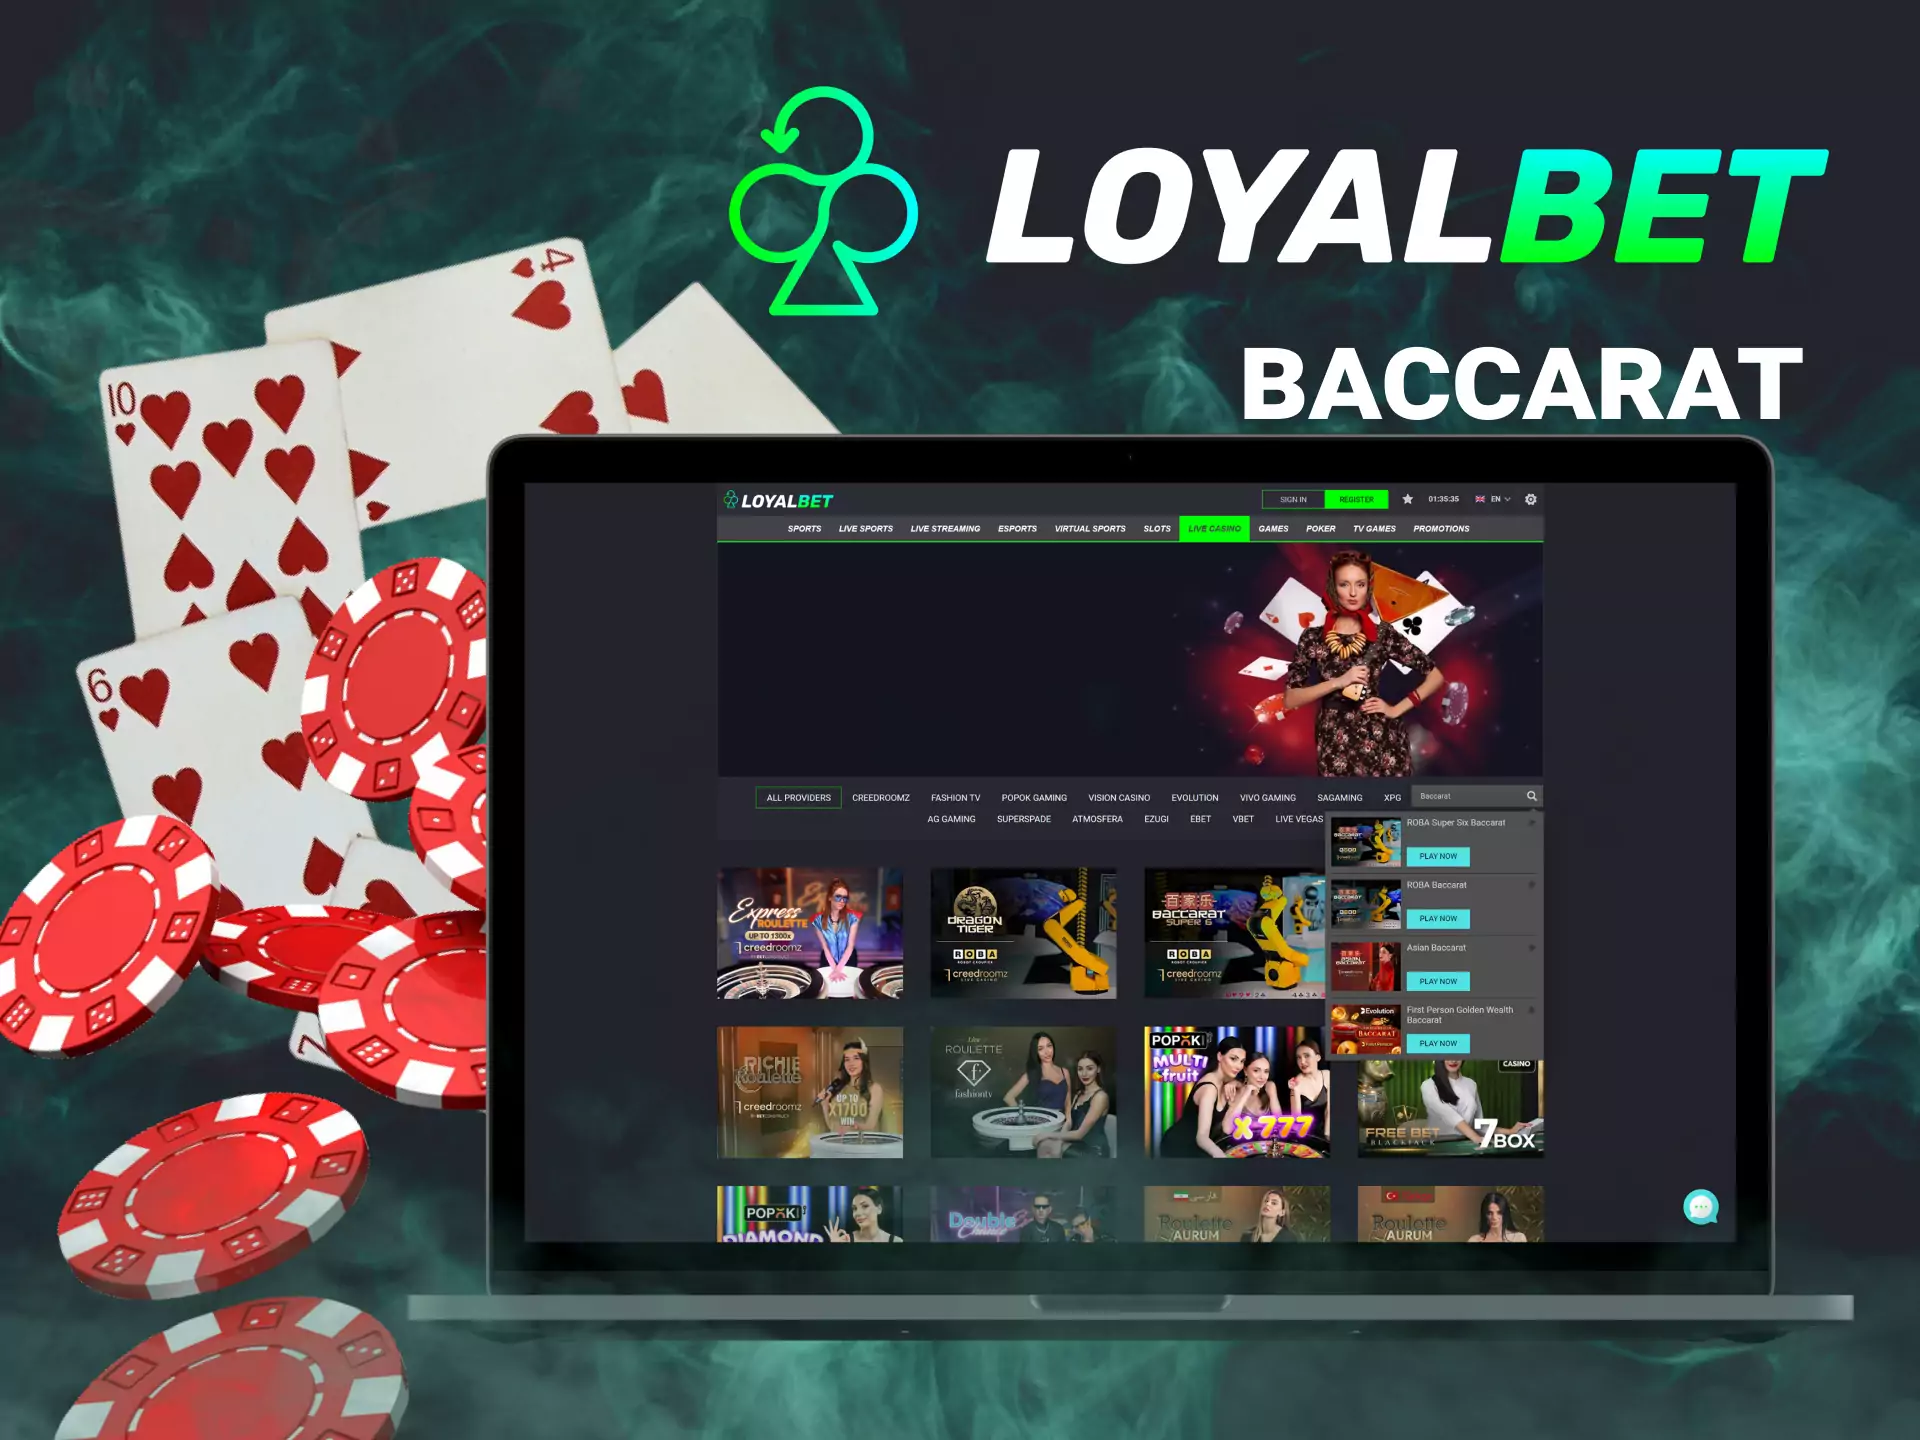 You can play a classic card game like baccarat on Loyalbet.